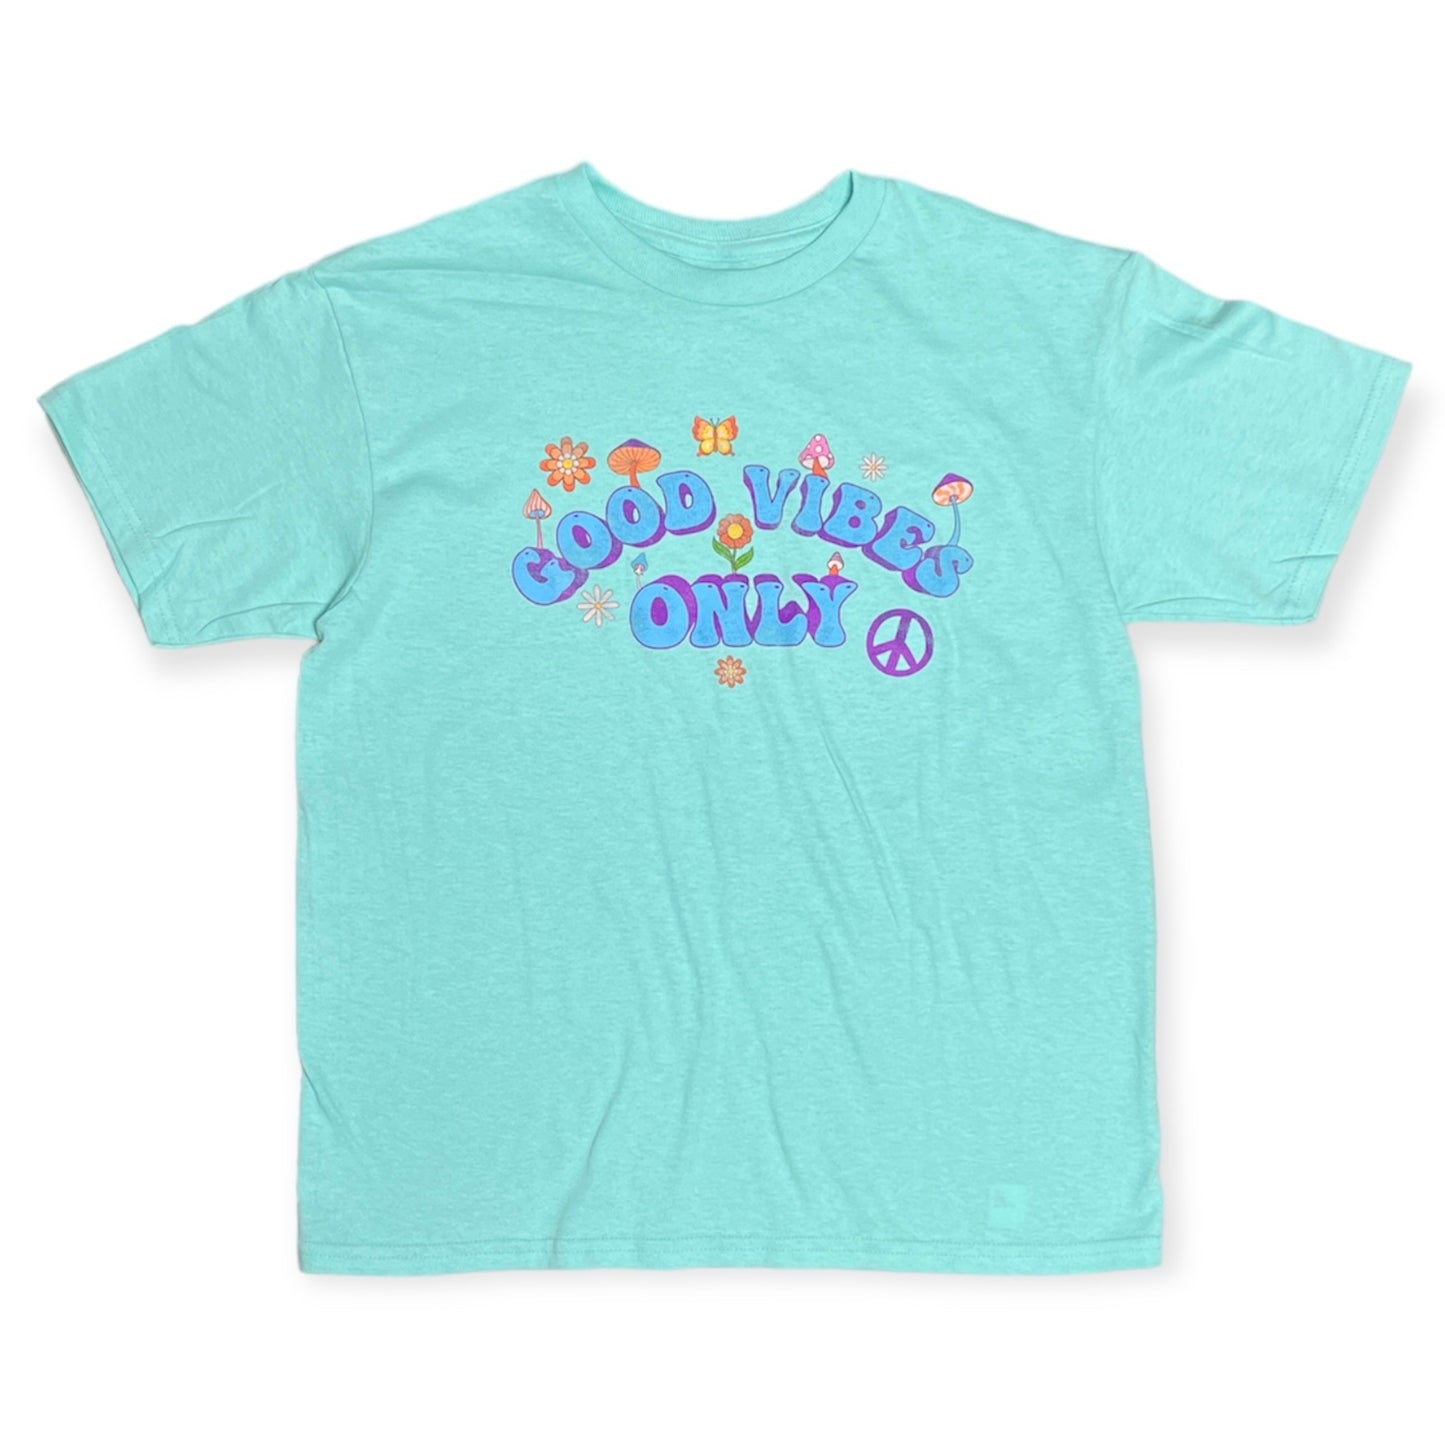 ROCK HALL GROOVY SHROOMS GOOD VIBES ONLY KIDS T-SHIRT